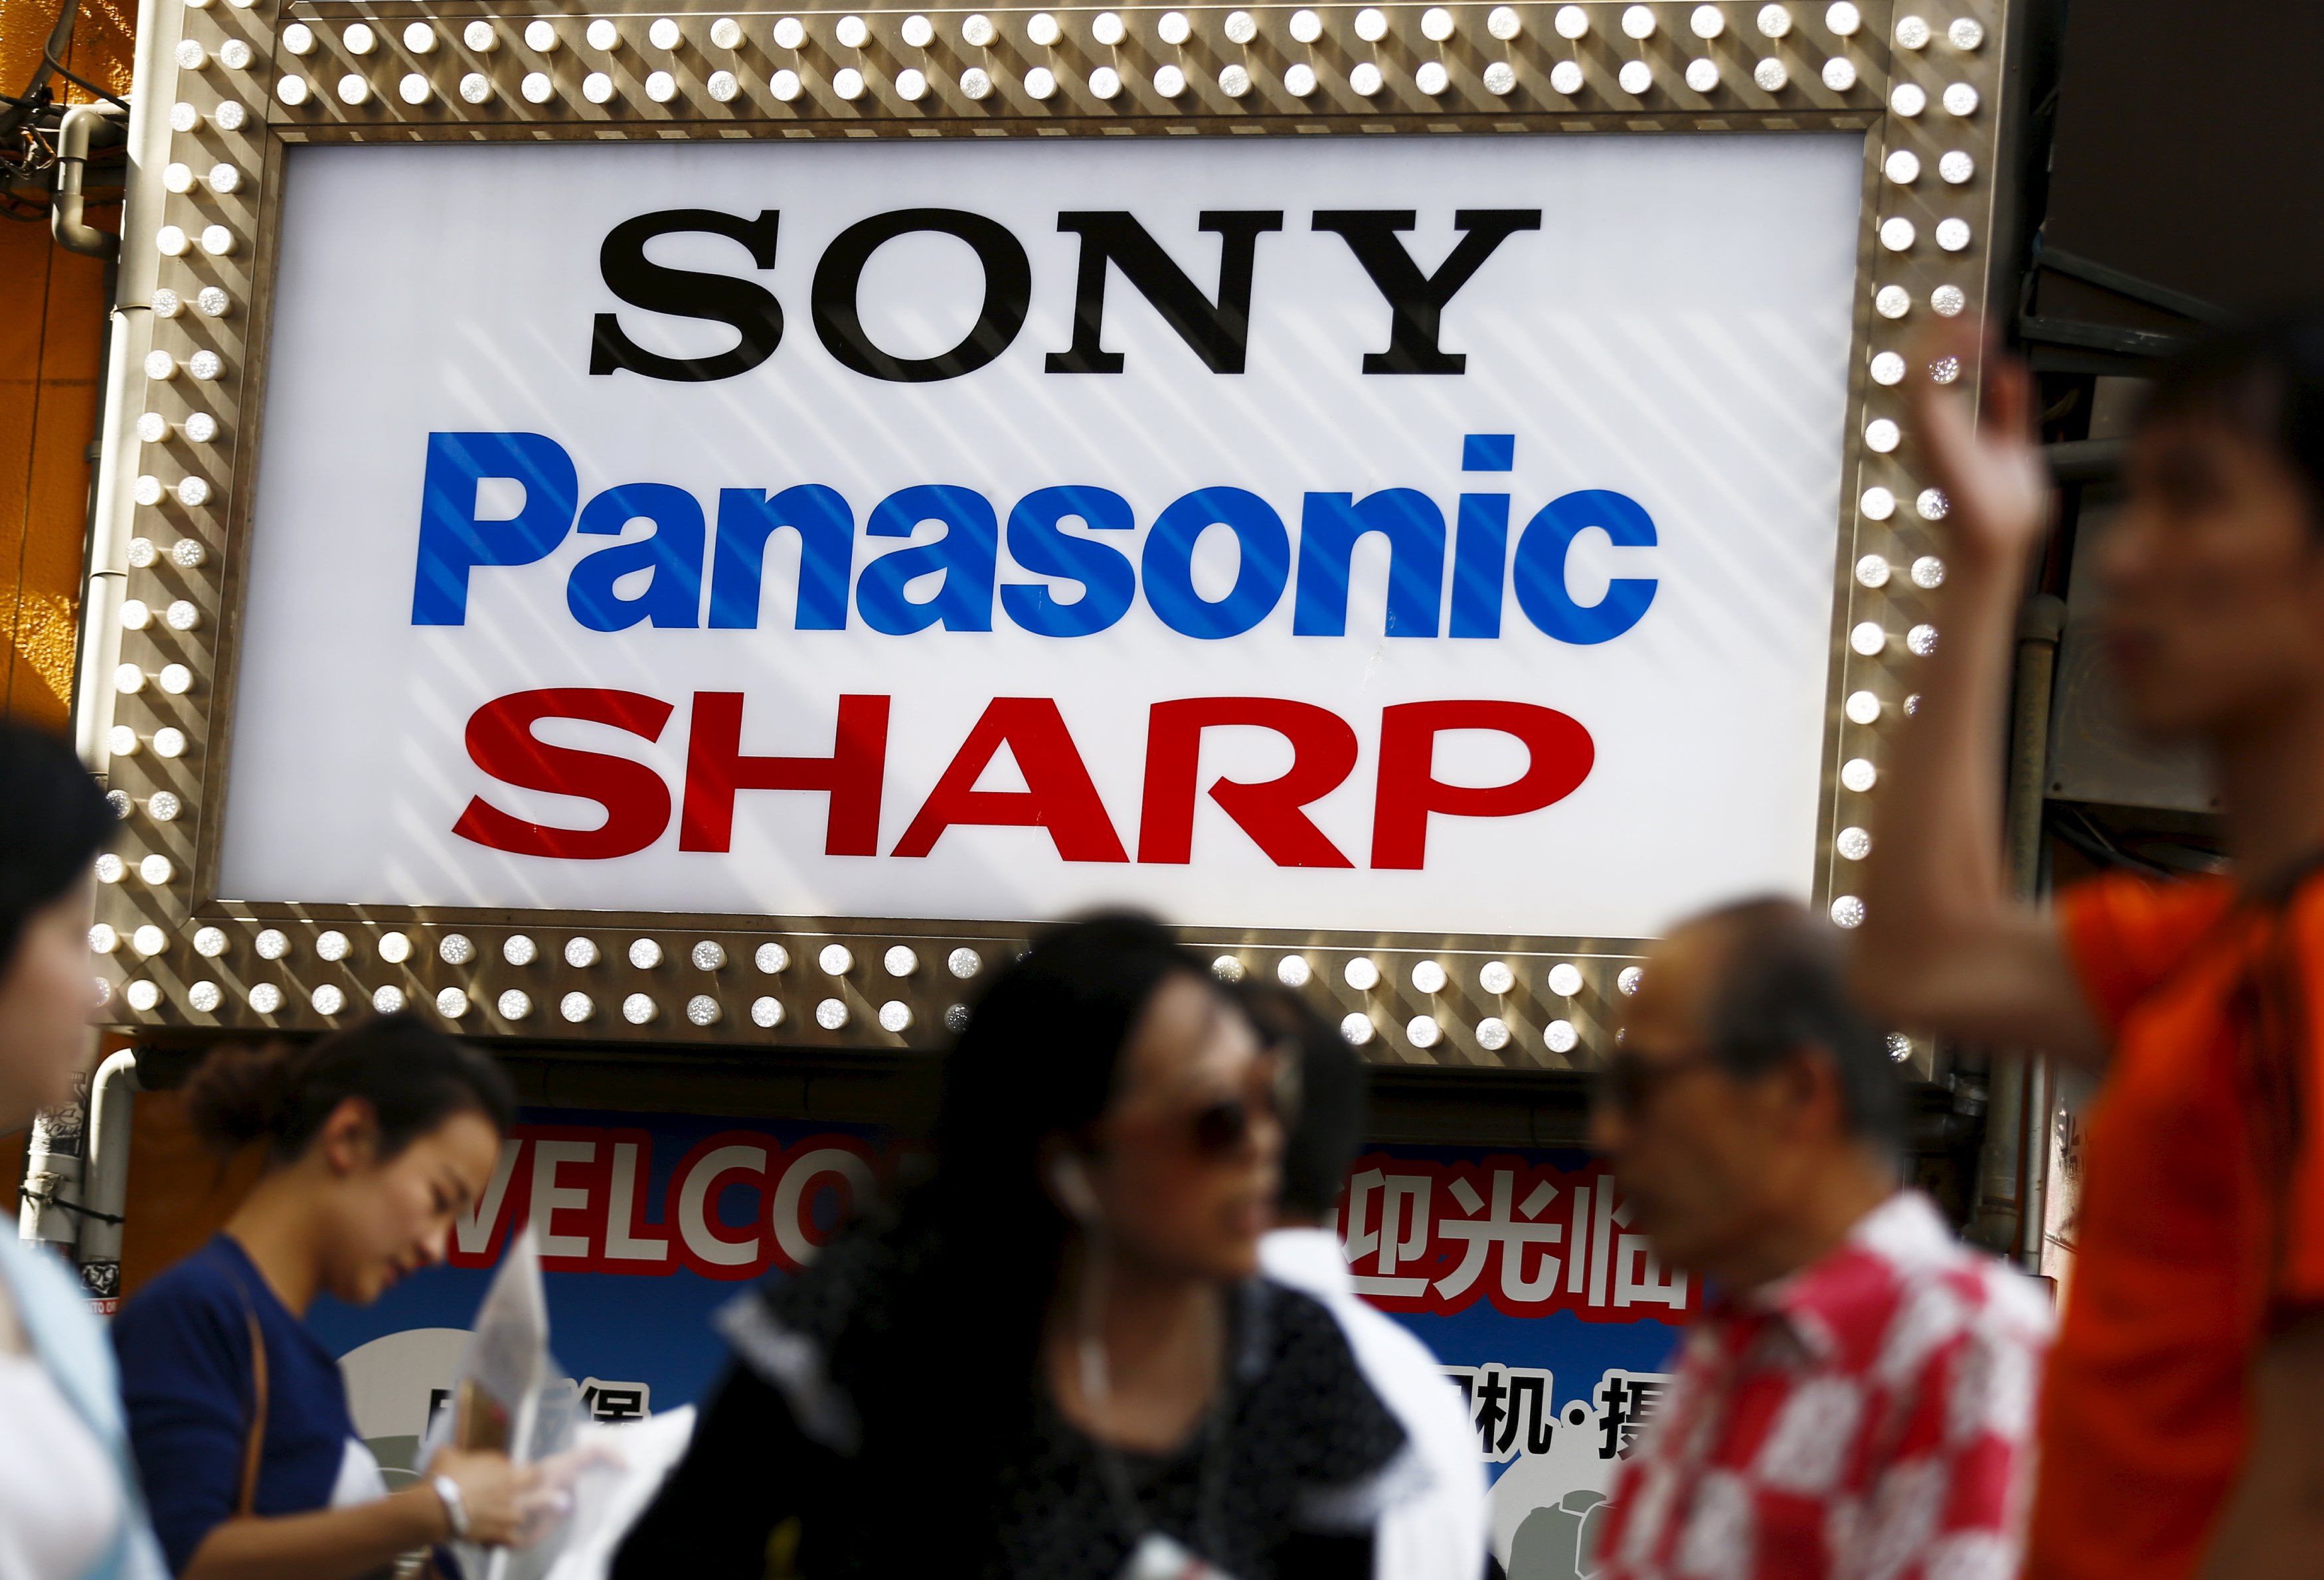 Sony, Panasonic cling to TVs, betting on halo effect of premium sets